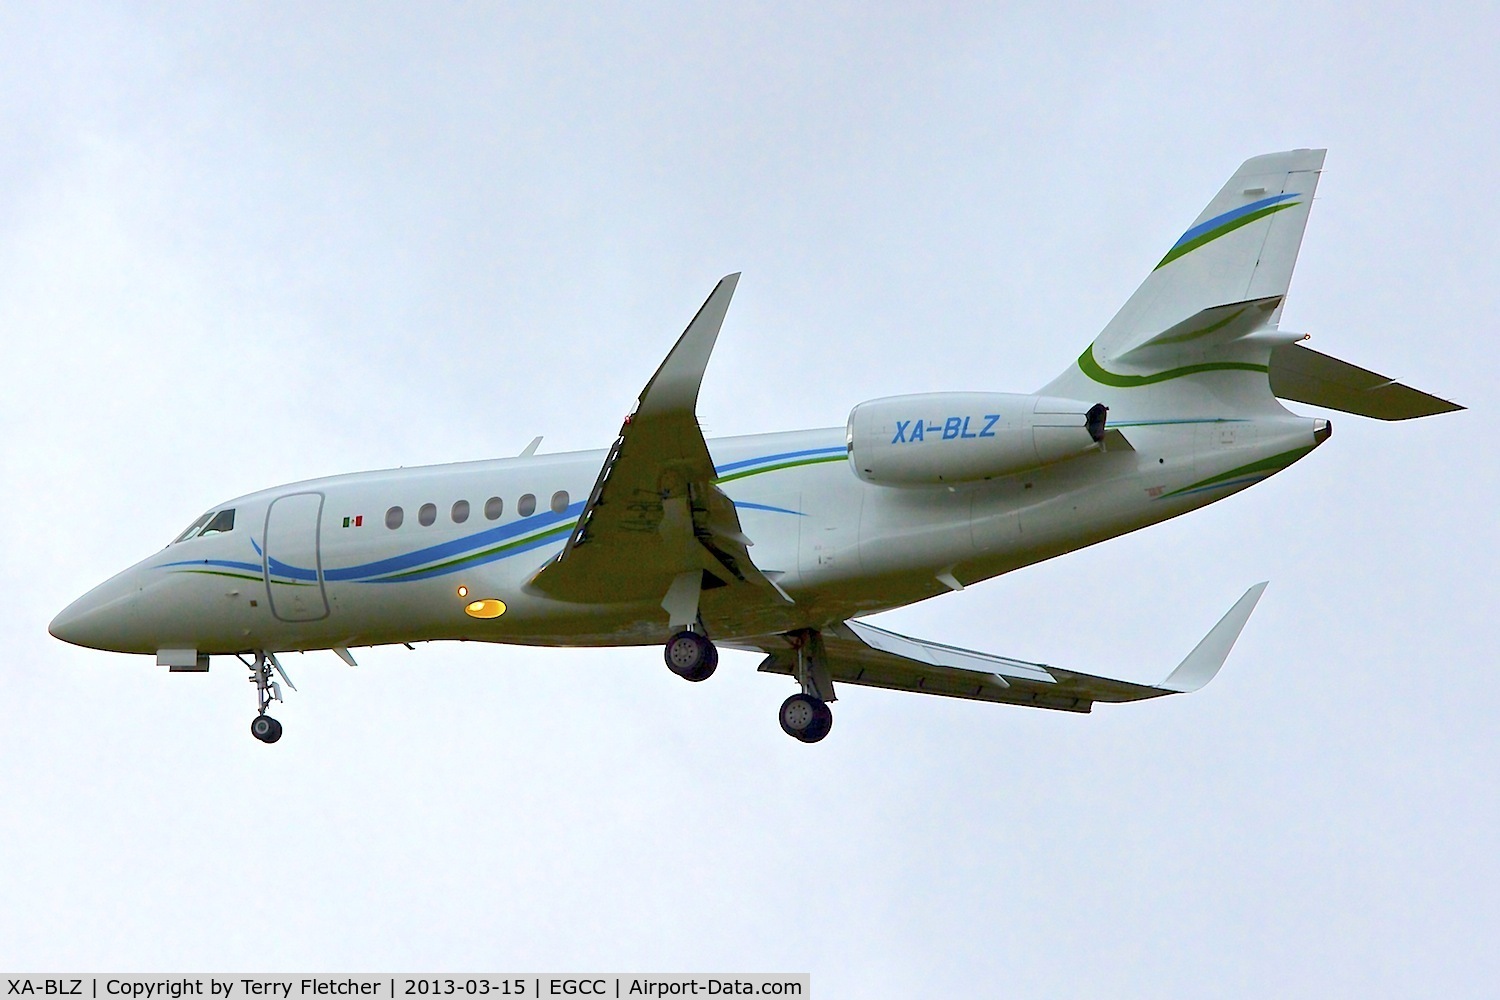 XA-BLZ, 2013 Dassault Falcon 2000LX C/N 251, Dassault Falcon 2000LX, c/n: 251 about to land at Manchester, UK